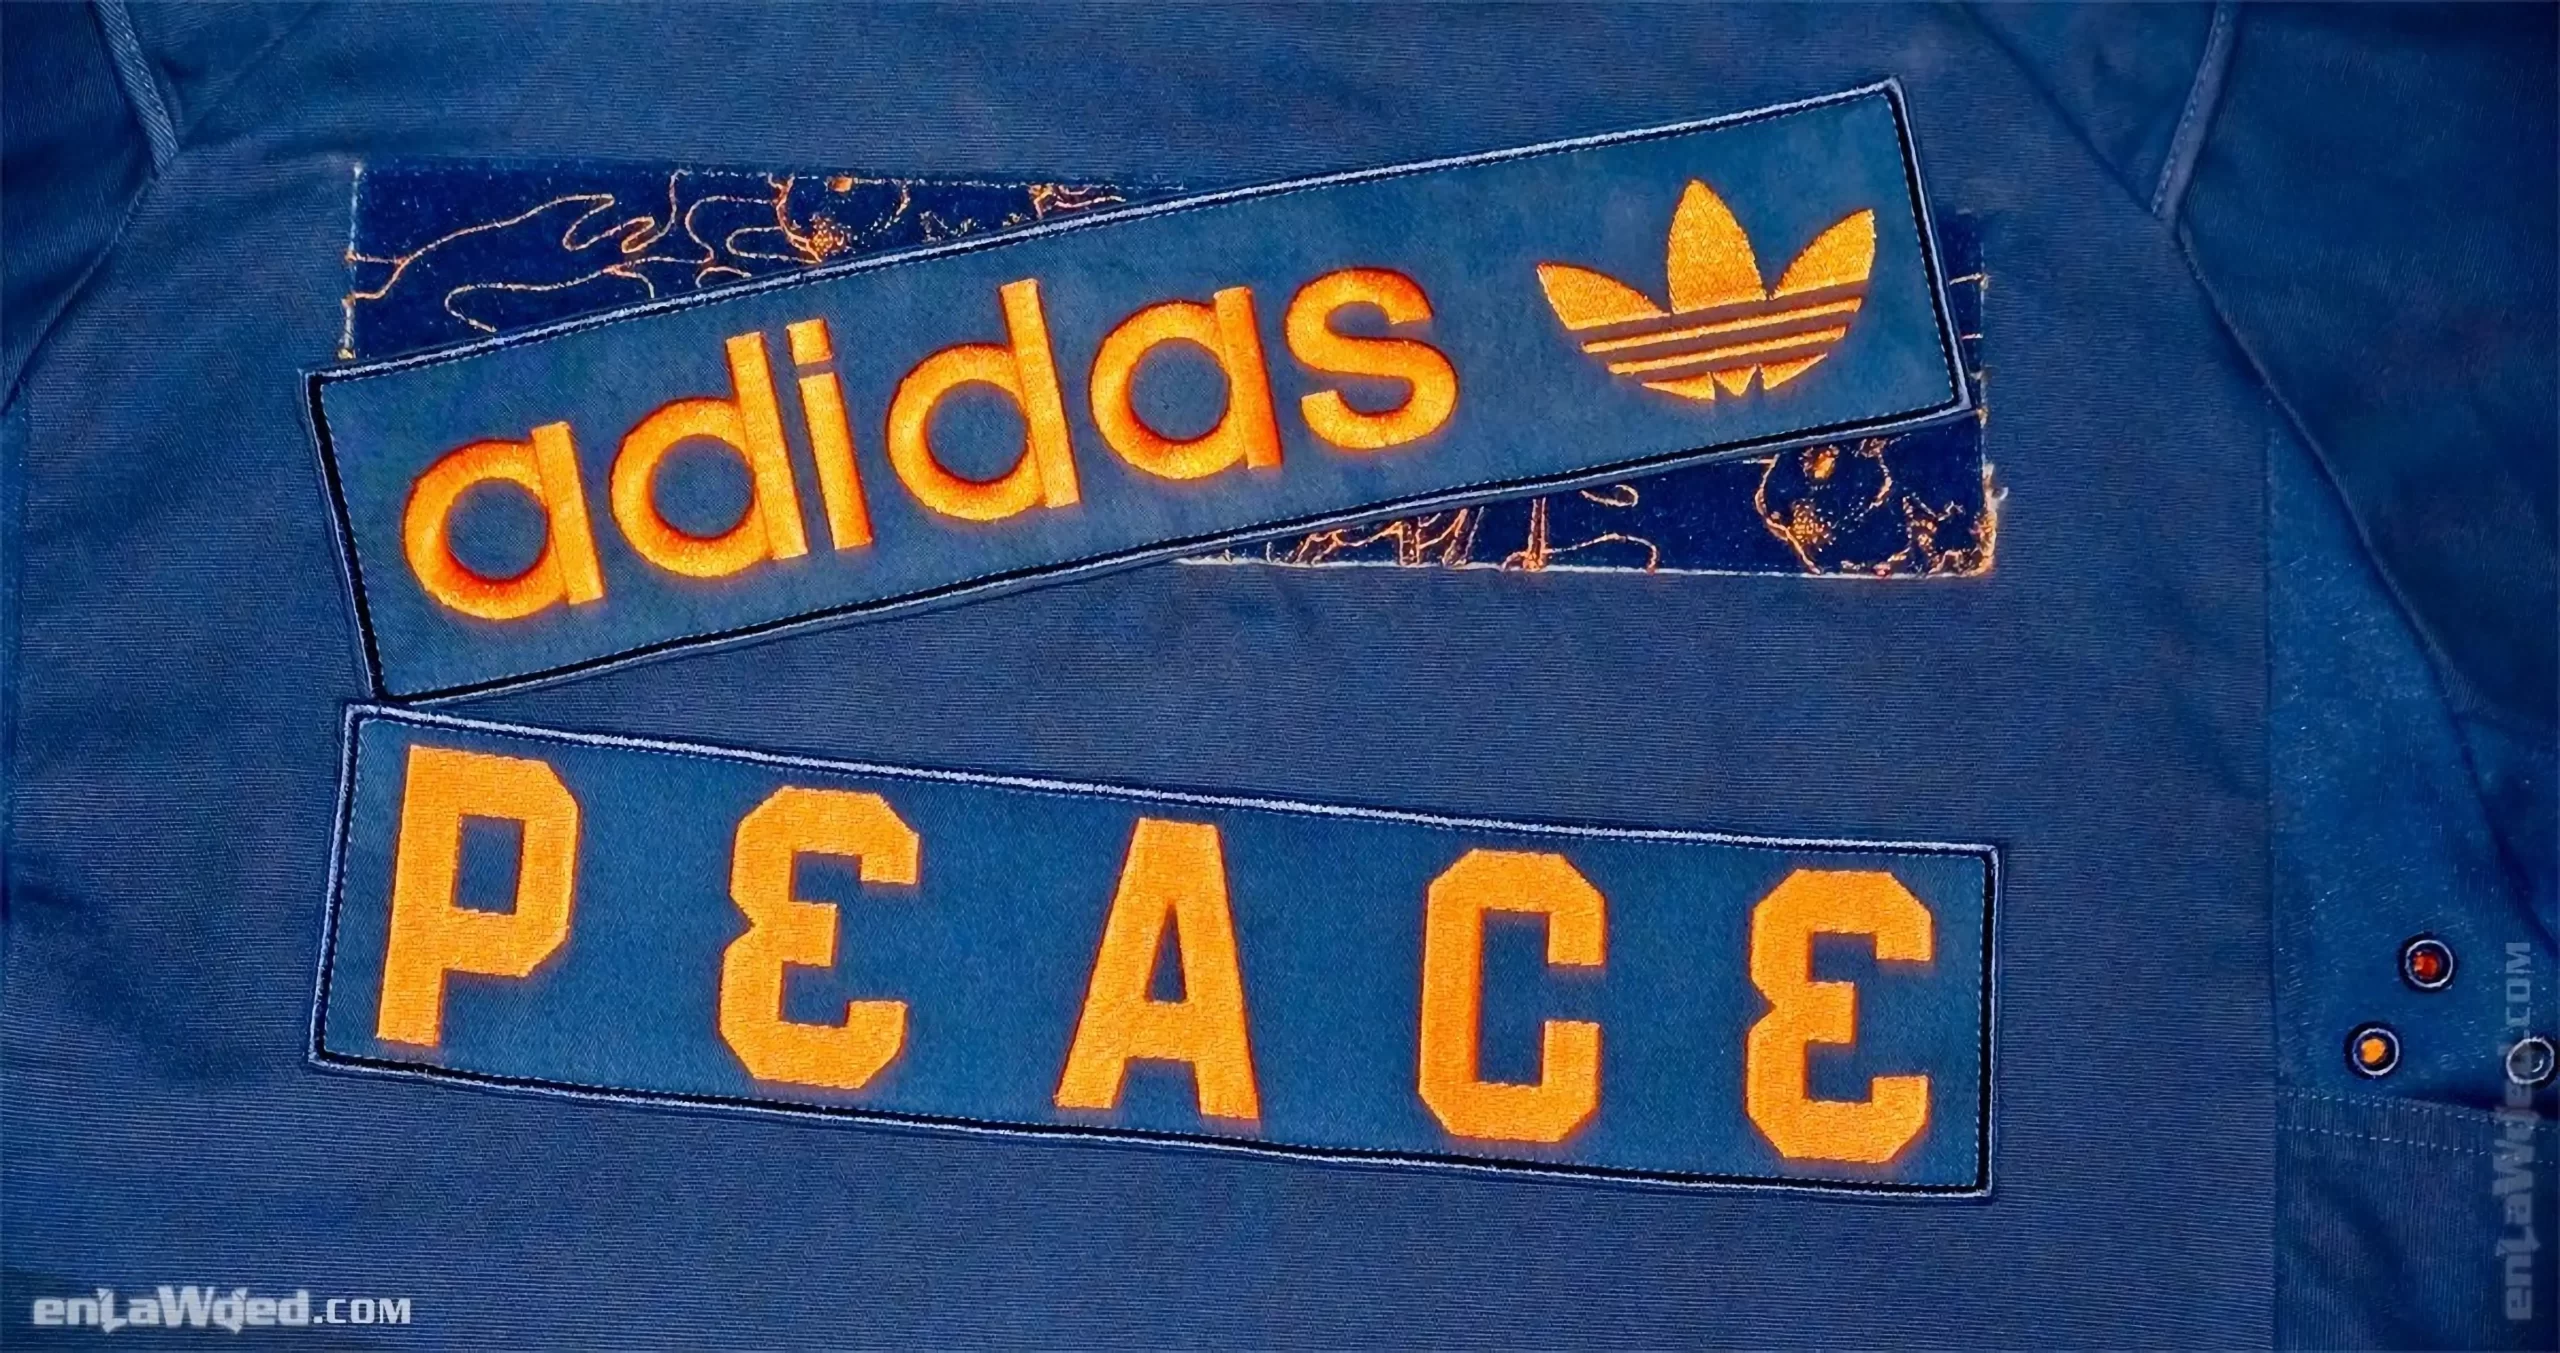 Men’s 2005 Adidas Originals Military Peace Jacket: Unstoppable (EnLawded.com file #lmchbskd3hwc1gzjsce)